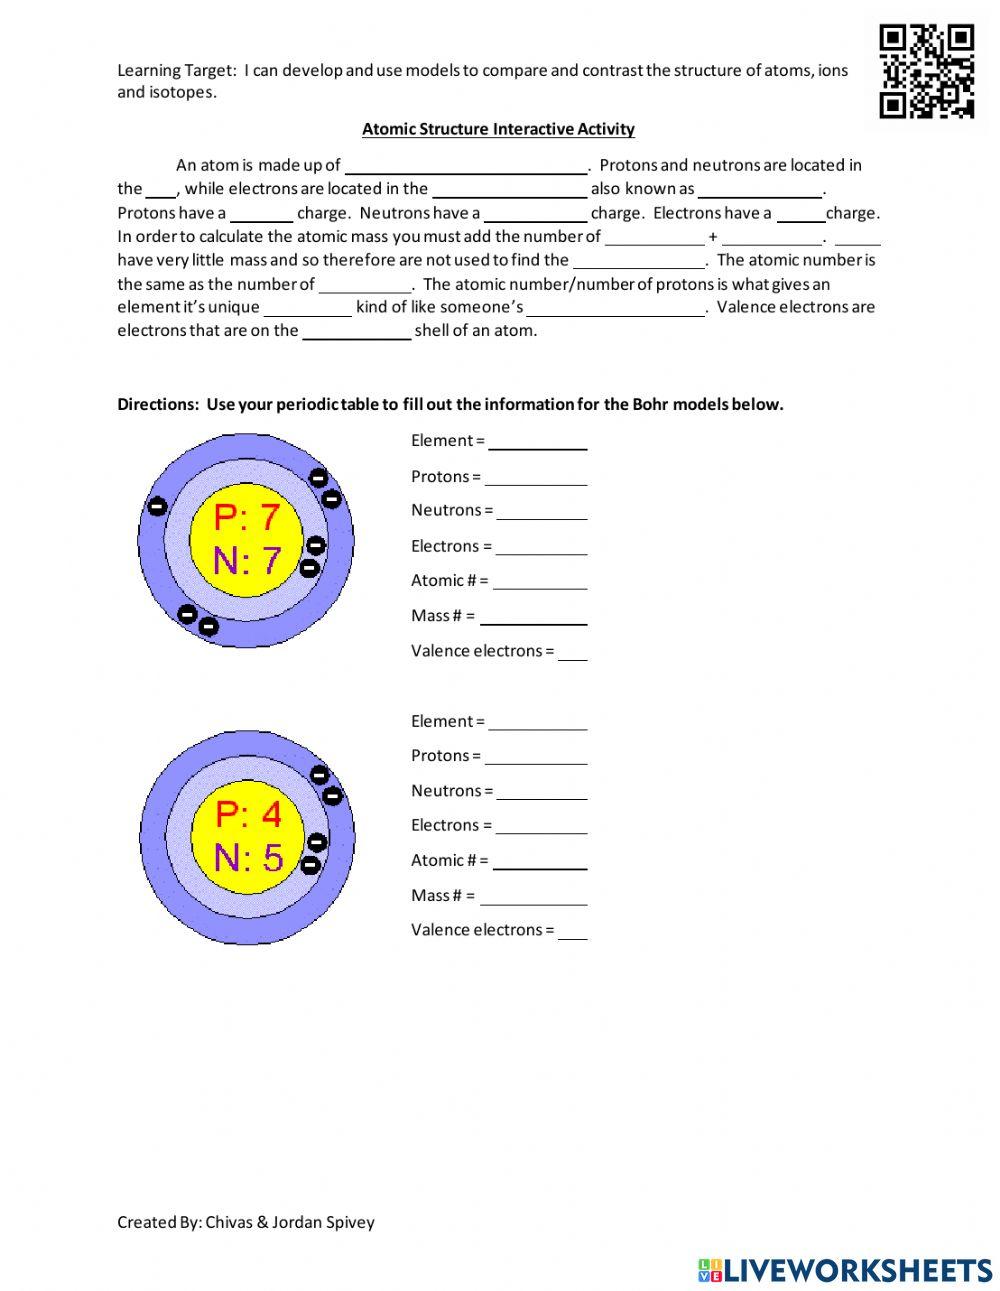 Atomic Structure Interactive Activity